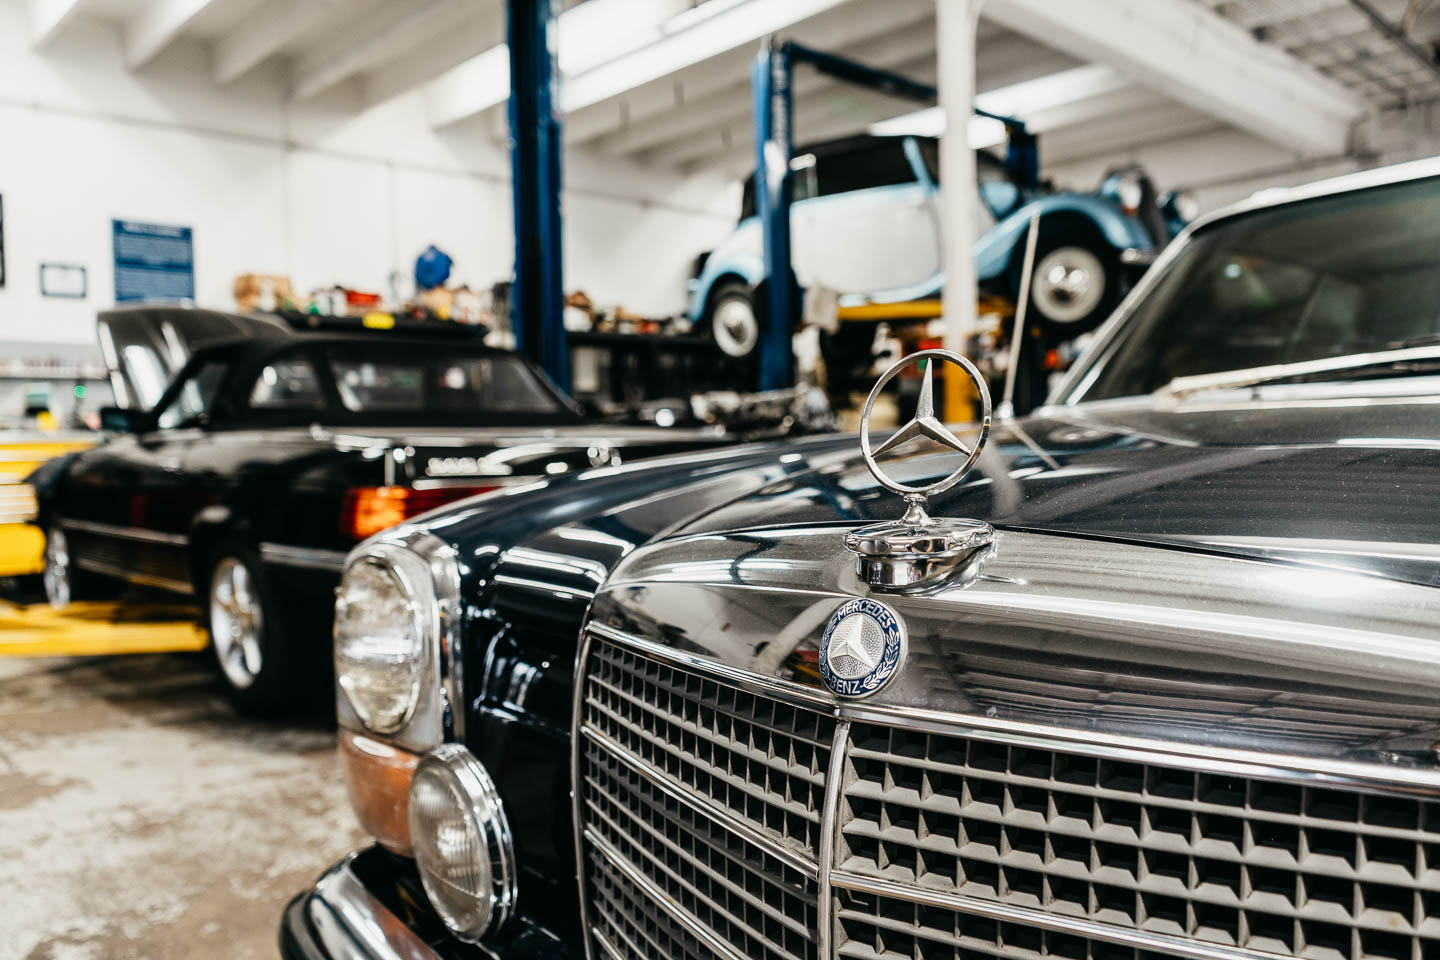 Close-up of the iconic Mercedes-Benz emblem on a restored classic model in the Miami Benz workshop.